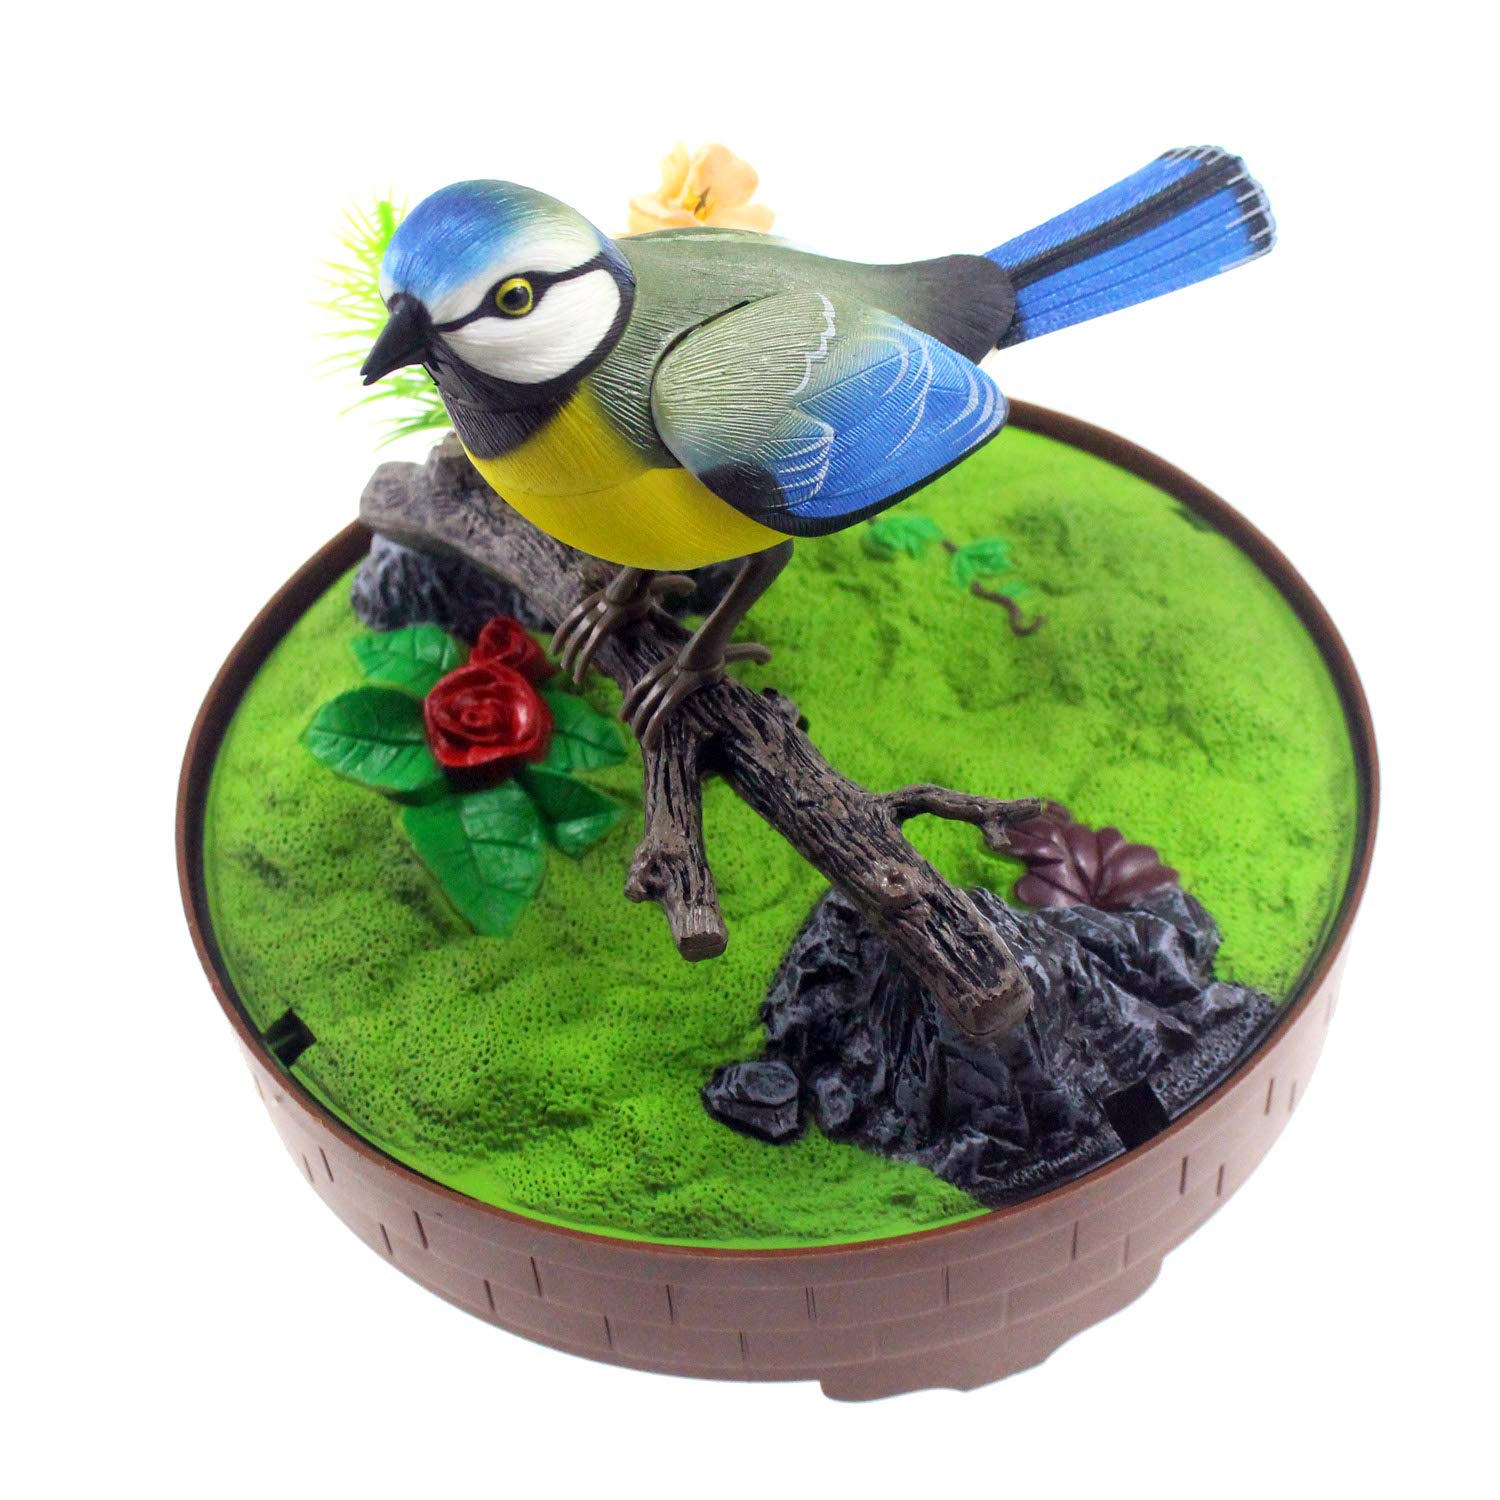 Tipmant Cute Electronic Pets Simulation Sparrow Bird in Cage Move Chirp Home Room Decor Ornament Kids Toys Gifts (Blue)